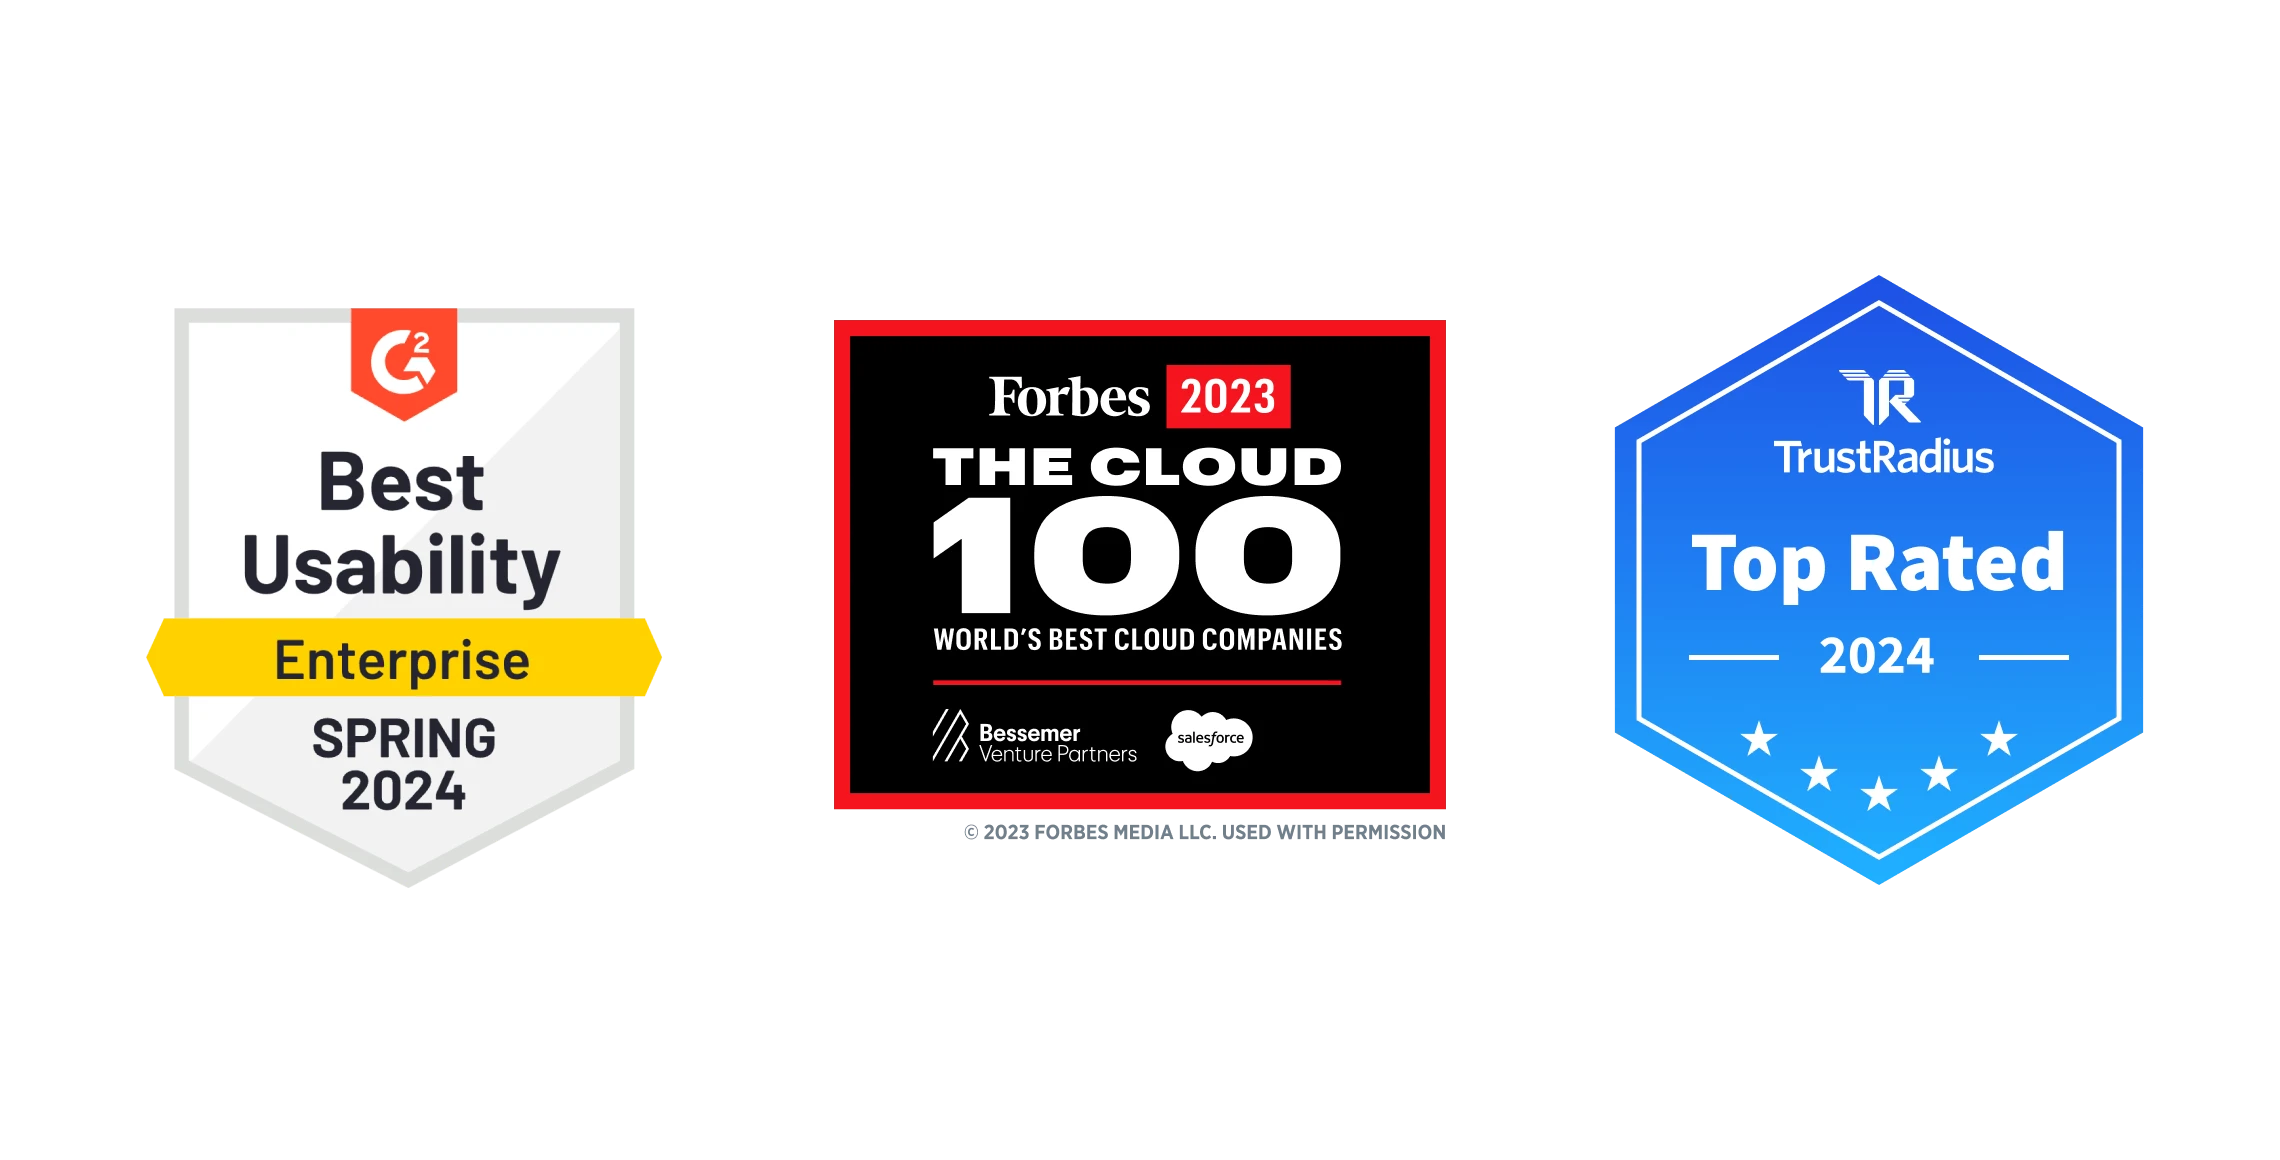 Best Usability G2 Spring 2024 Forbes Cloud 100 2023 Trustradius 2024